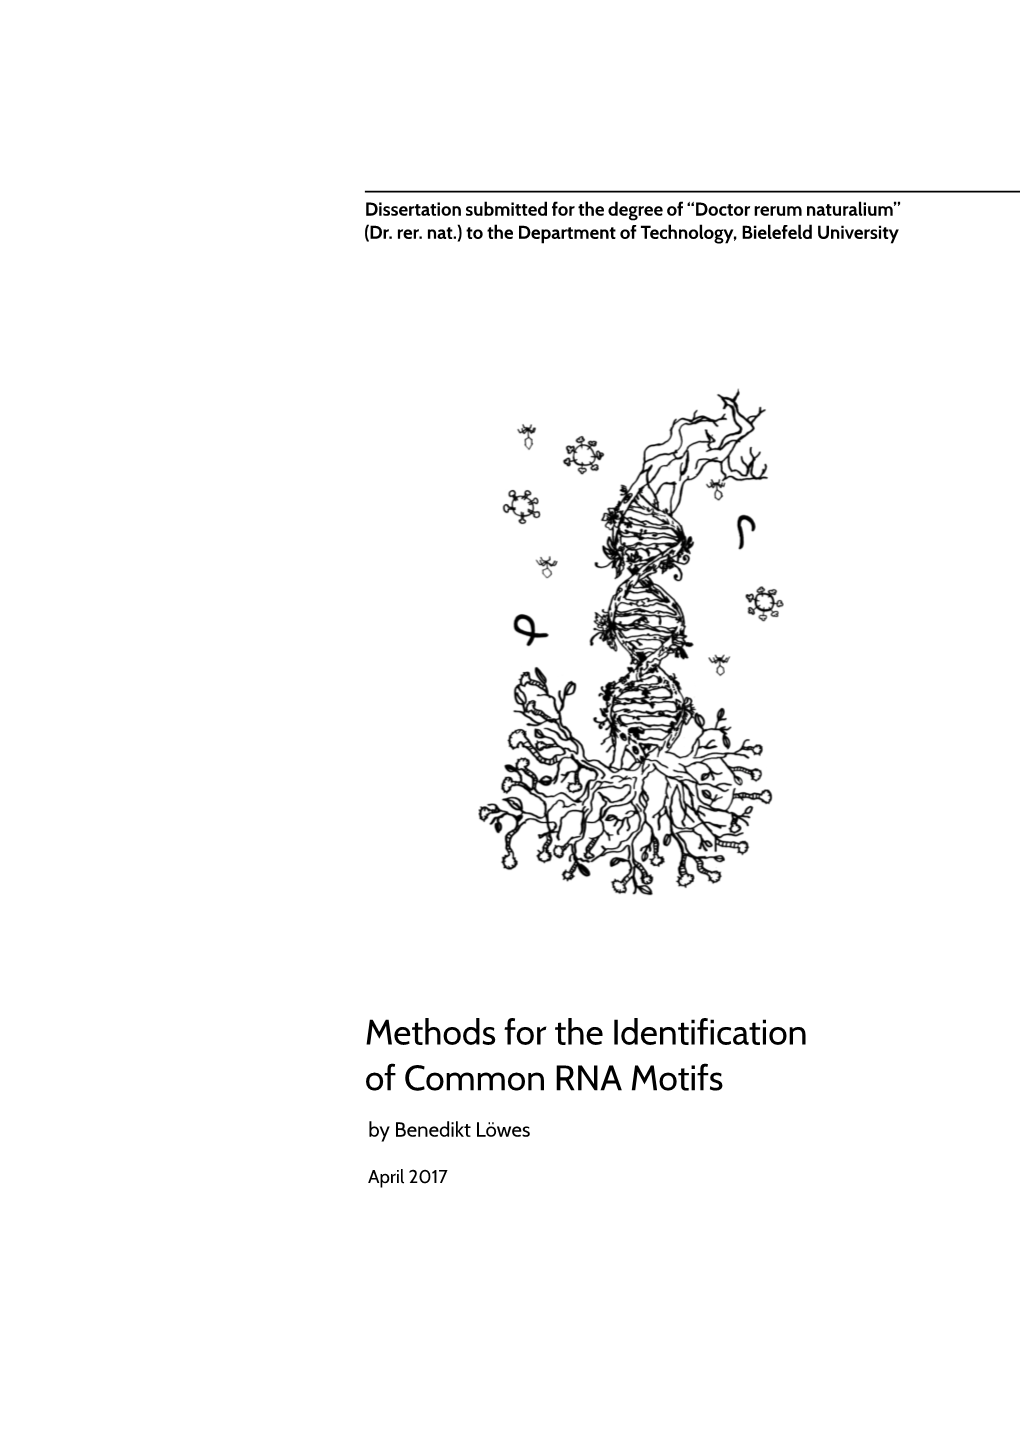 Methods for the Identification of Common RNA Motifs by Benedikt Löwes